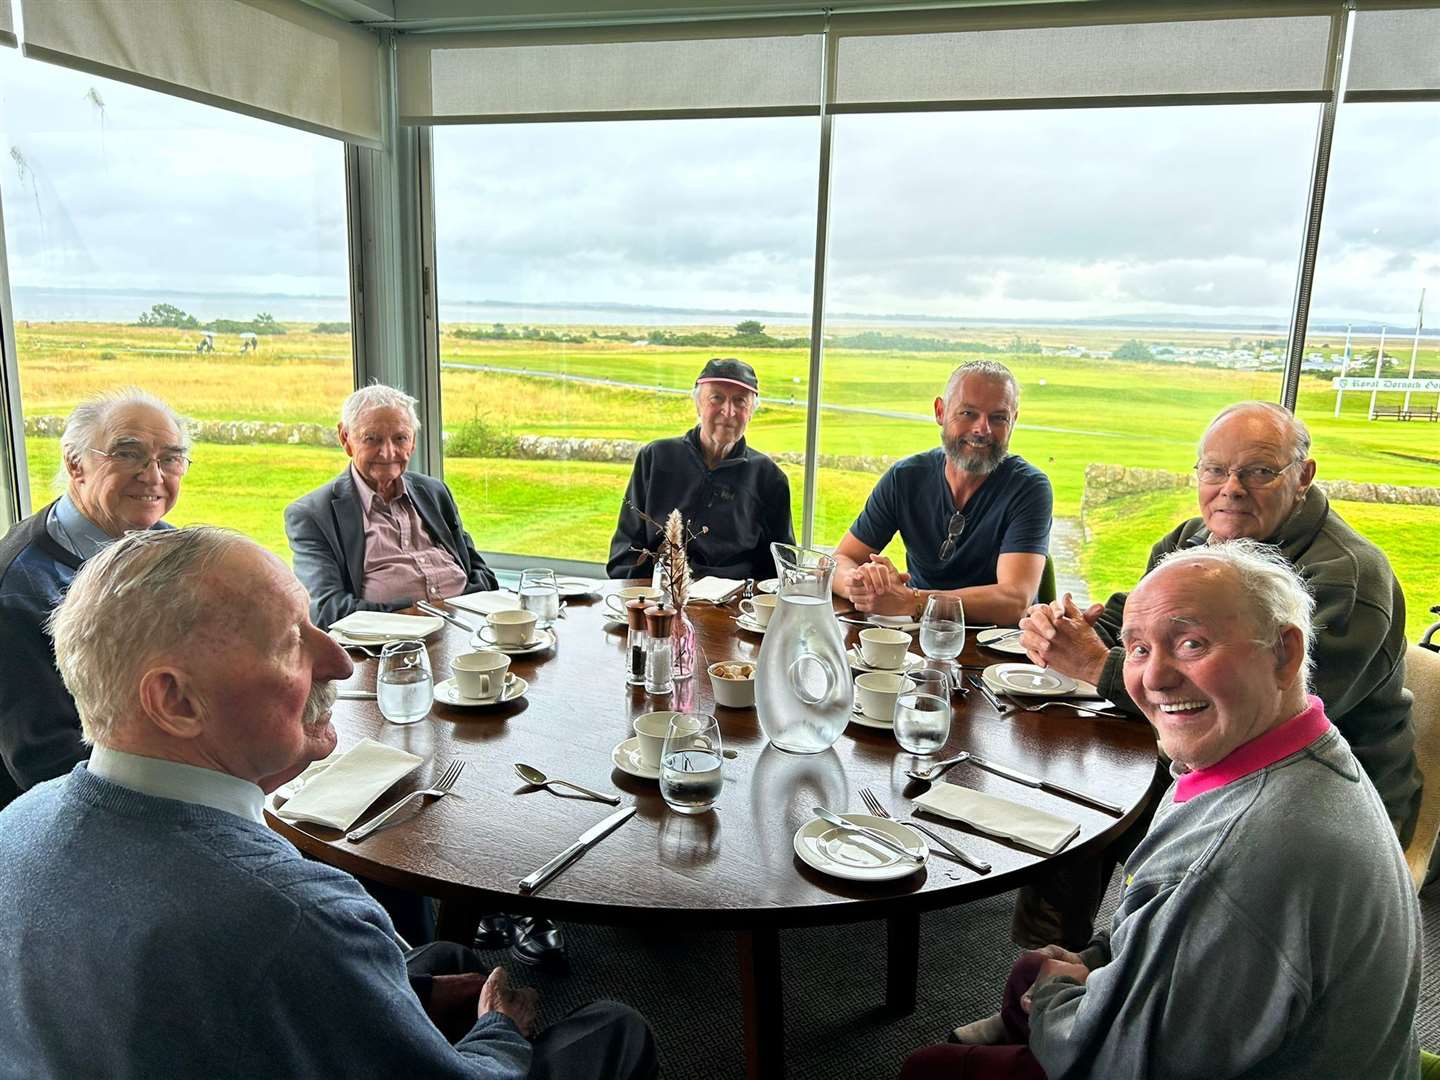 The Royal Golf Hotel at Dornoch served up a tasty lunch.